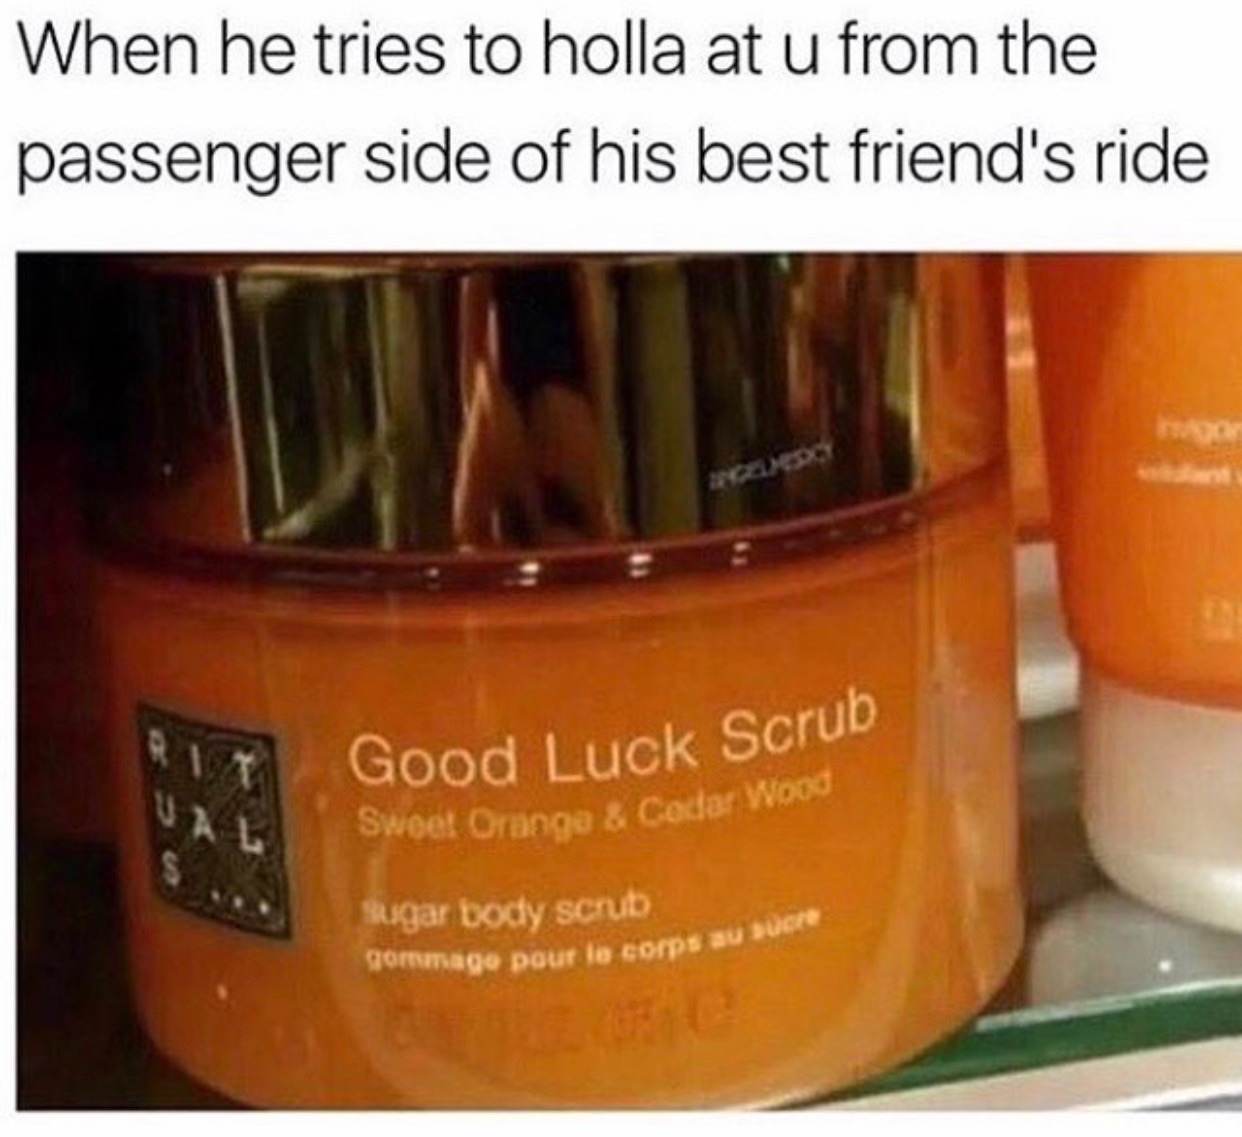 memes - he tries to holla at you - When he tries to holla at u from the passenger side of his best friend's ride Good Luck Scrub Sweet Omnga & Cocar wou sugar body scrub gommage pour le corps